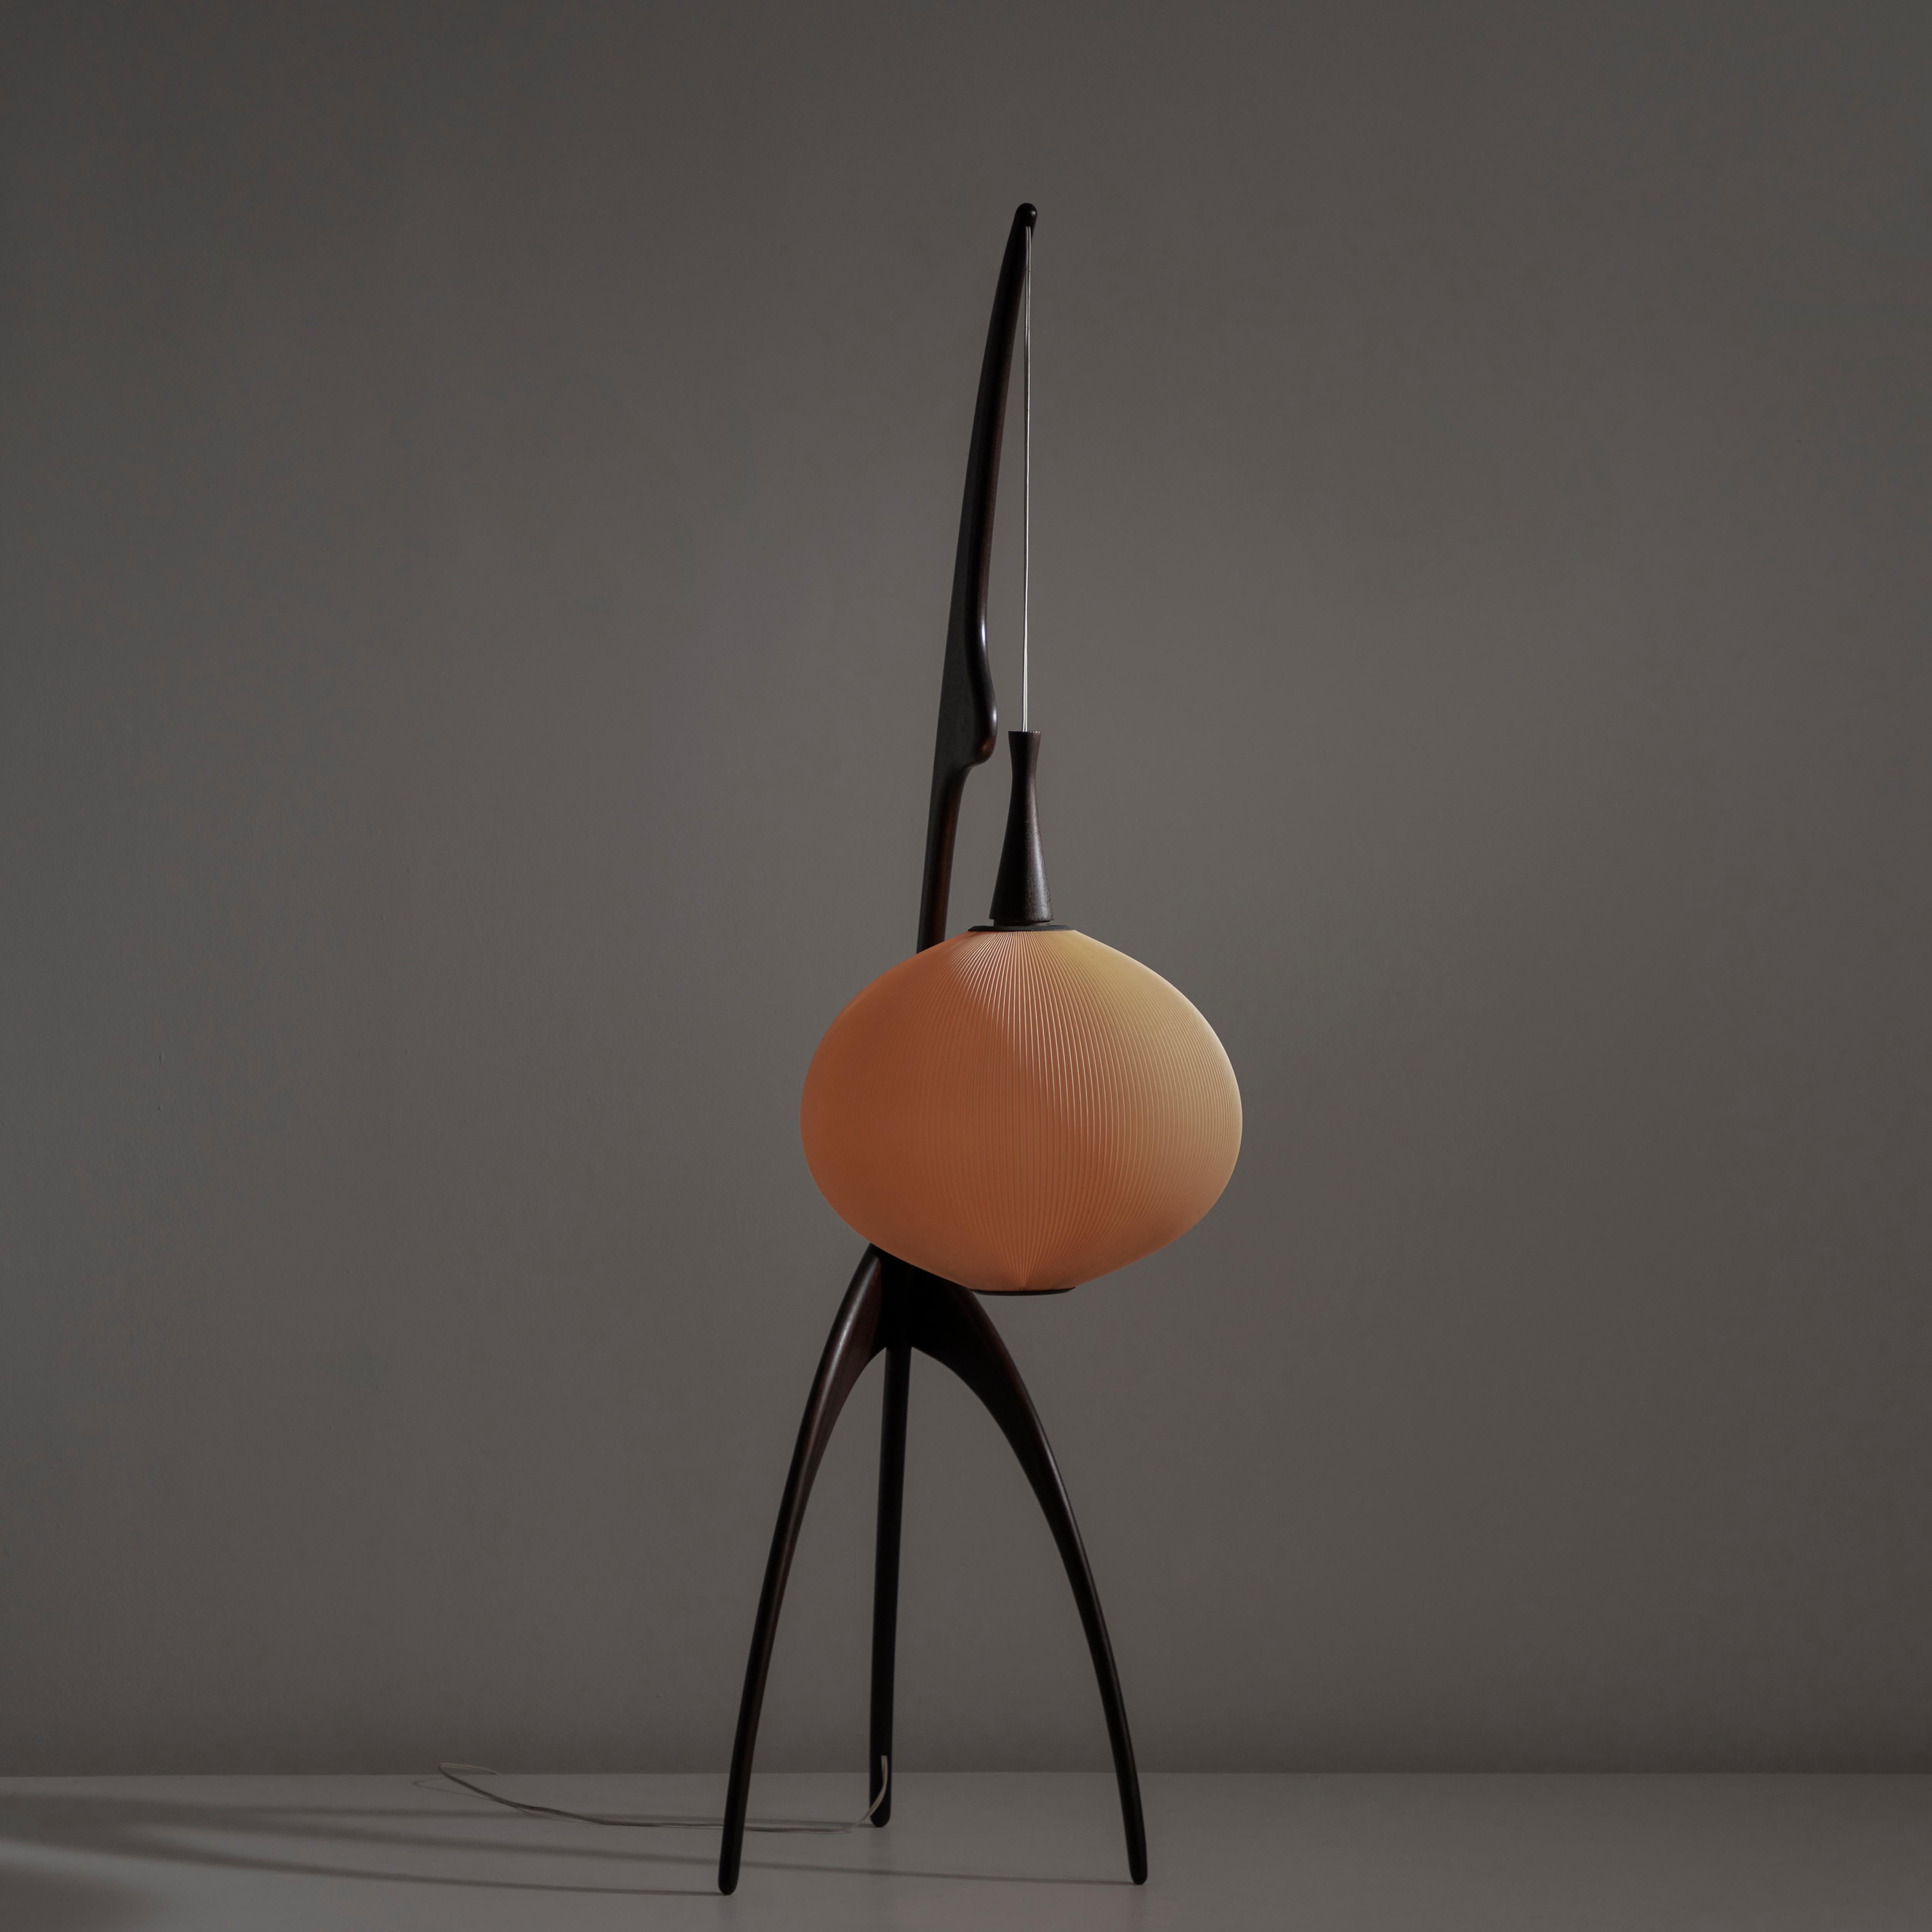 Stained Model 14.950 'Praying Mantis' Floor Lamp by Rispal